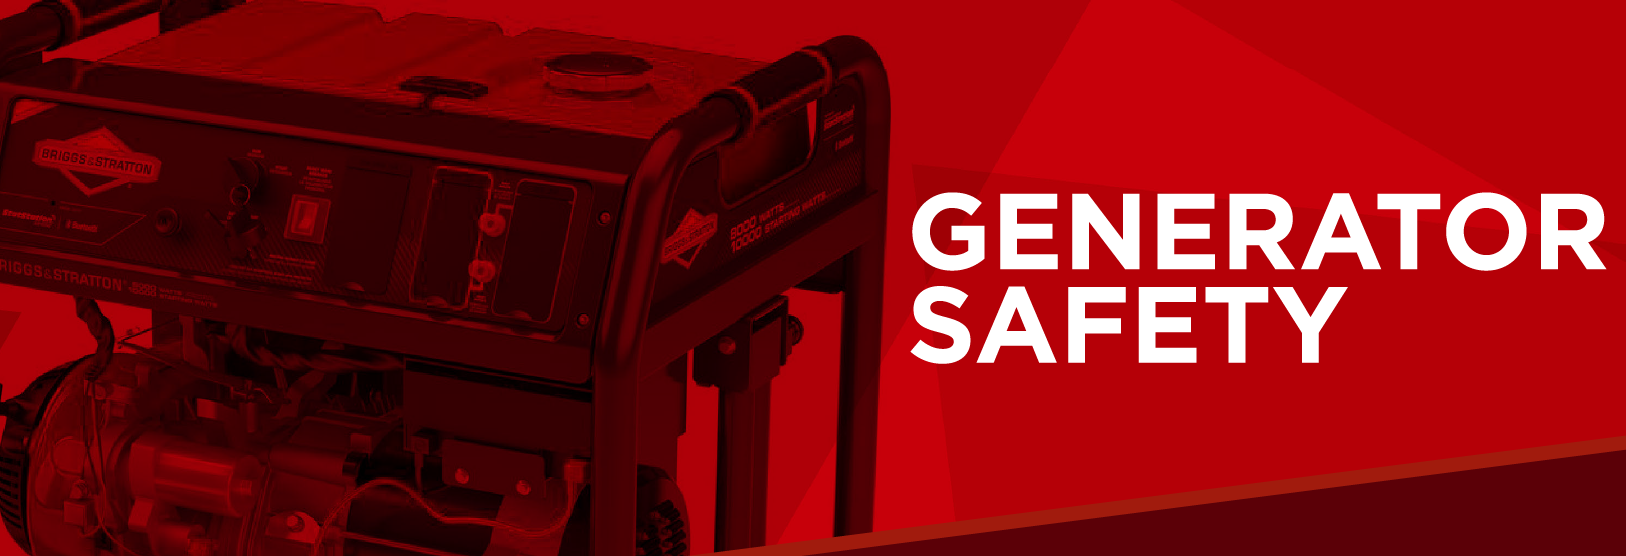 SECO News June Generator Safety